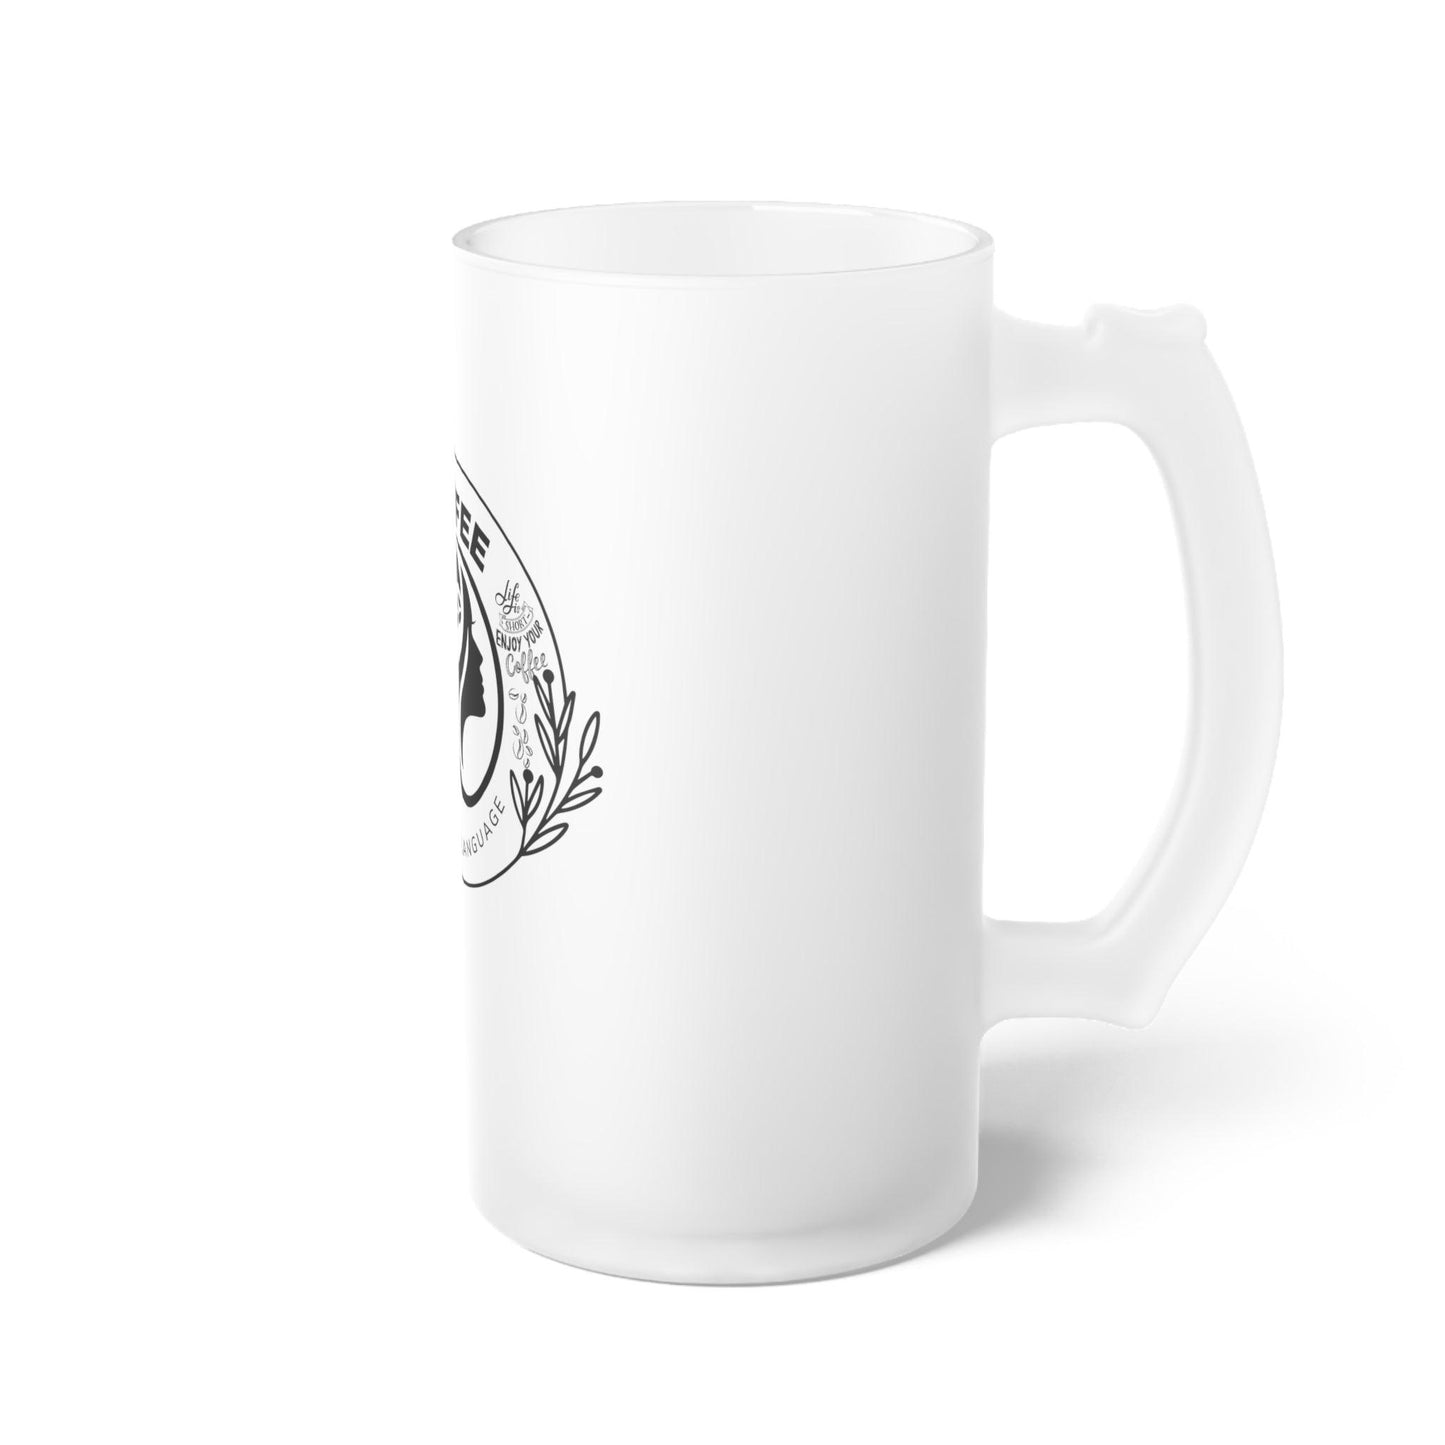 Coffee Frosted Glass Latte Mug - COFFEEBRE